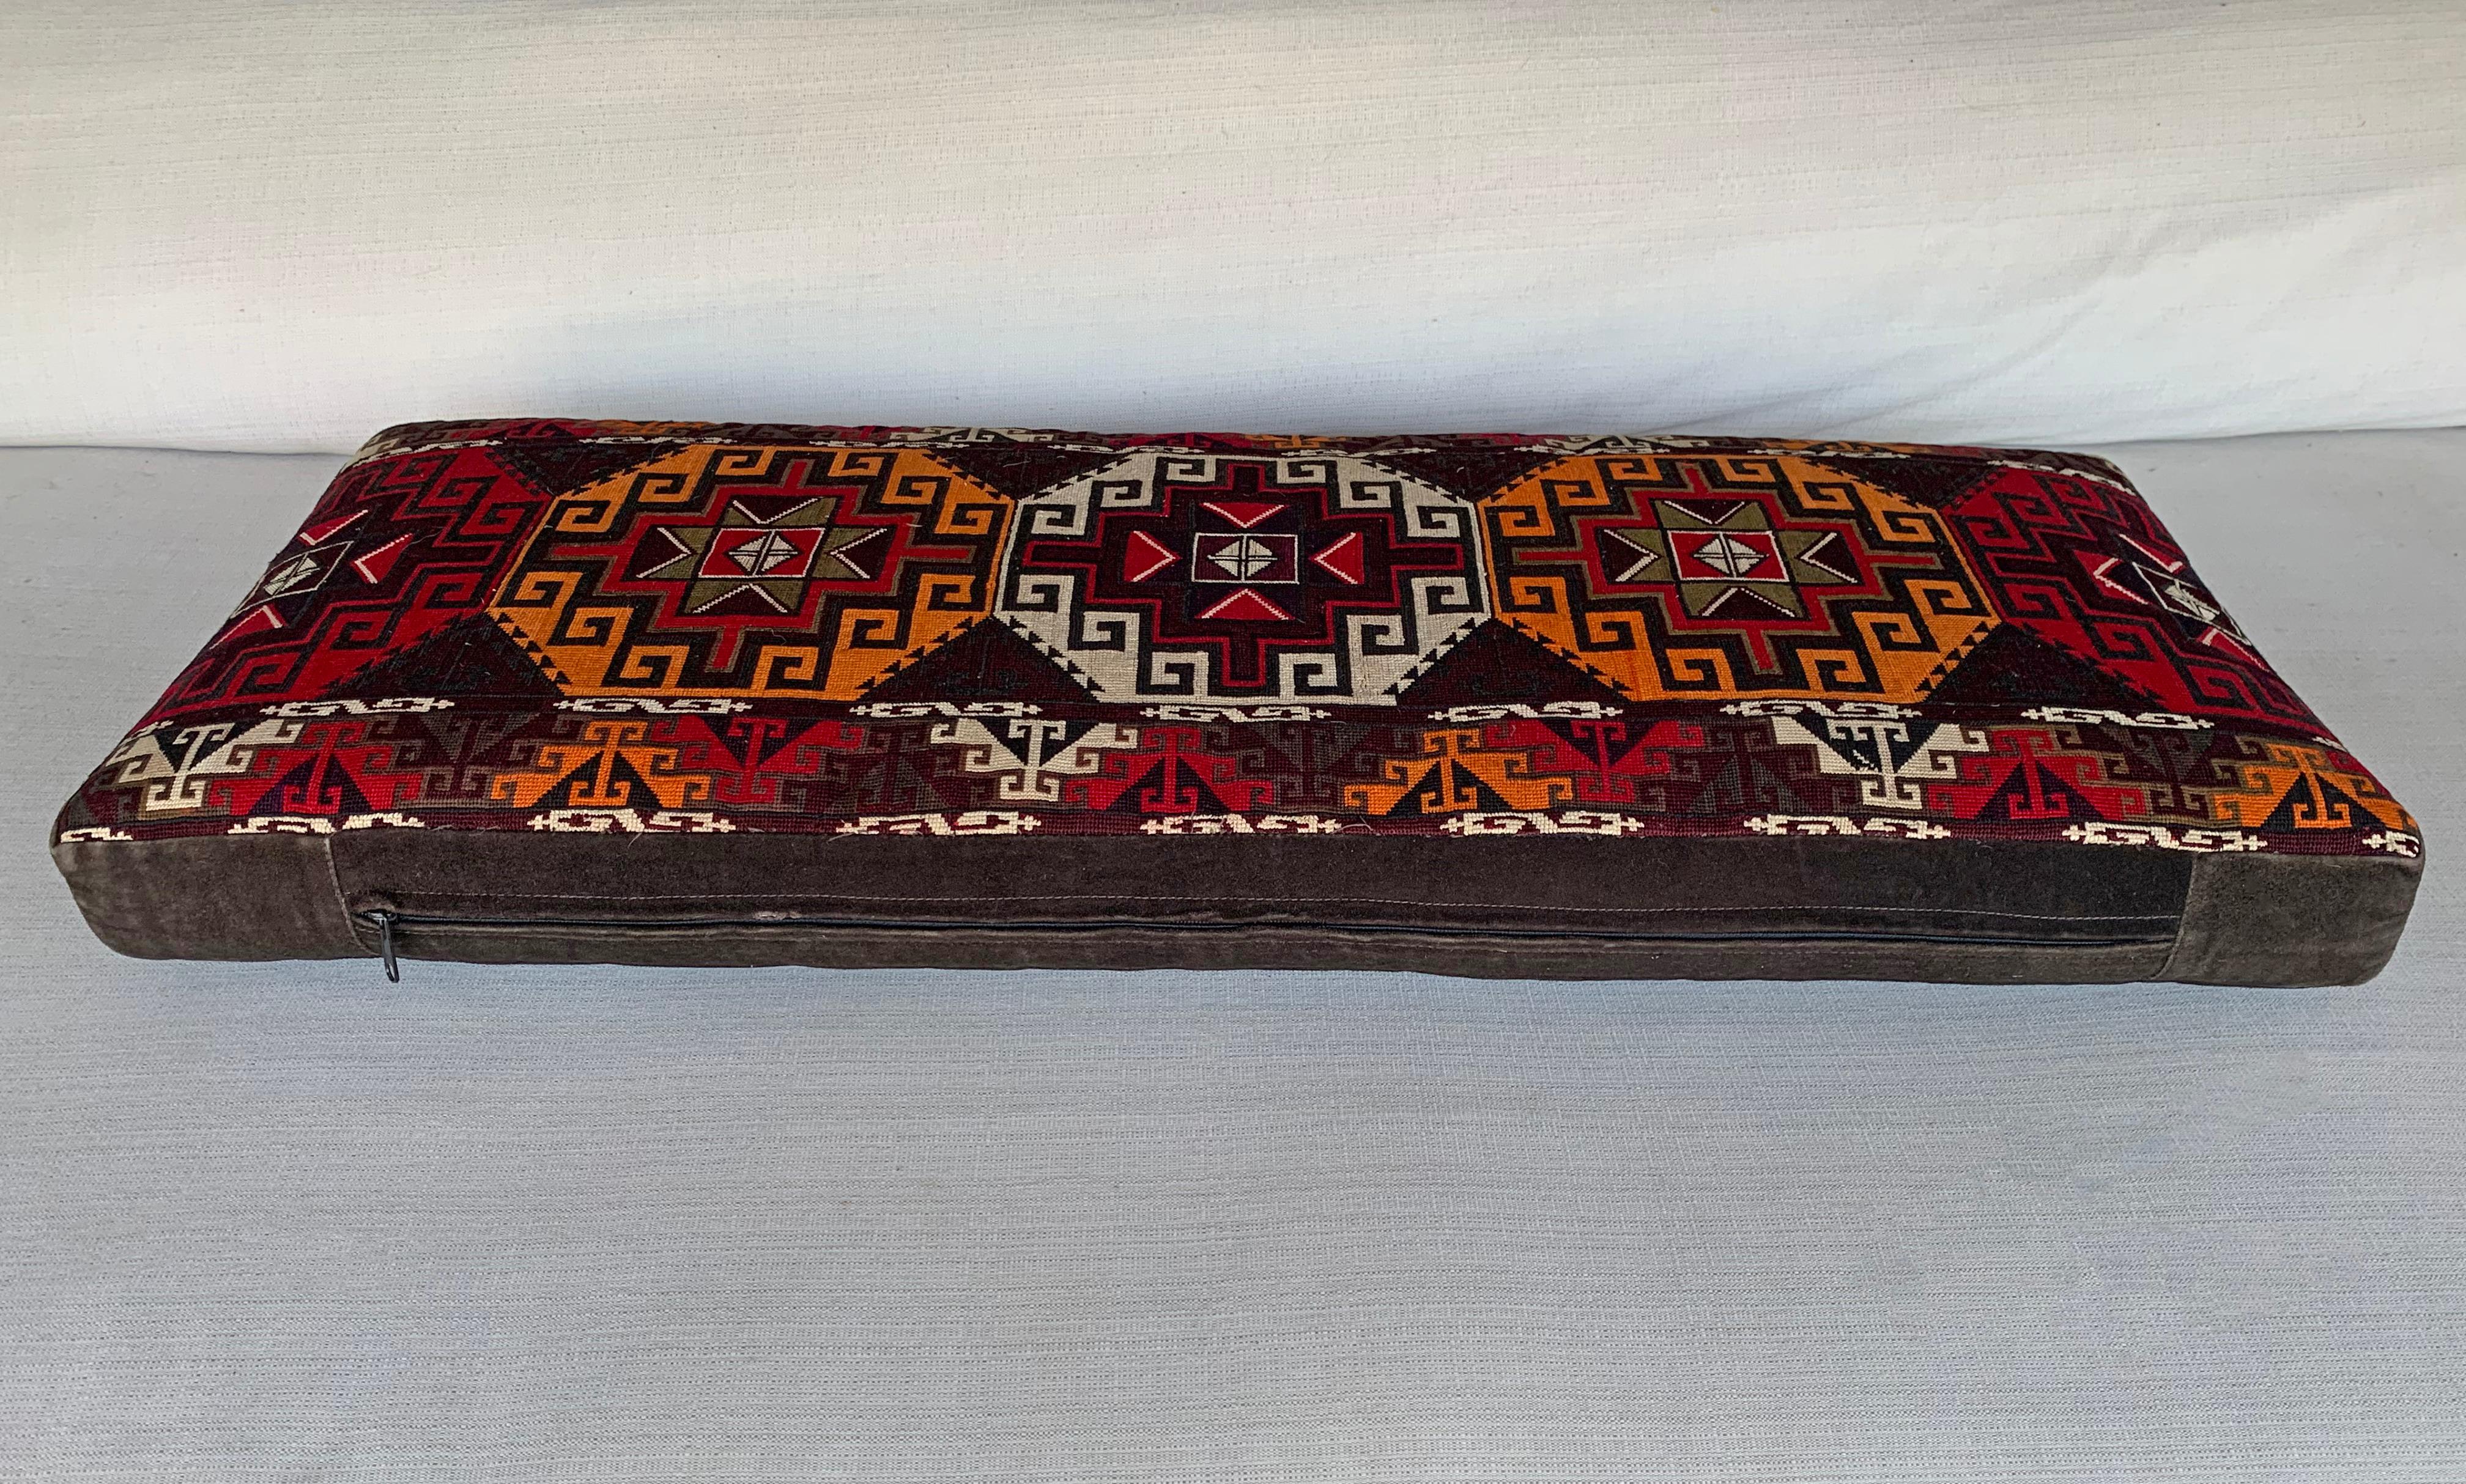 Cotton Suzani Central Asian Embroidered Textile Pillow, Mid 20th Century